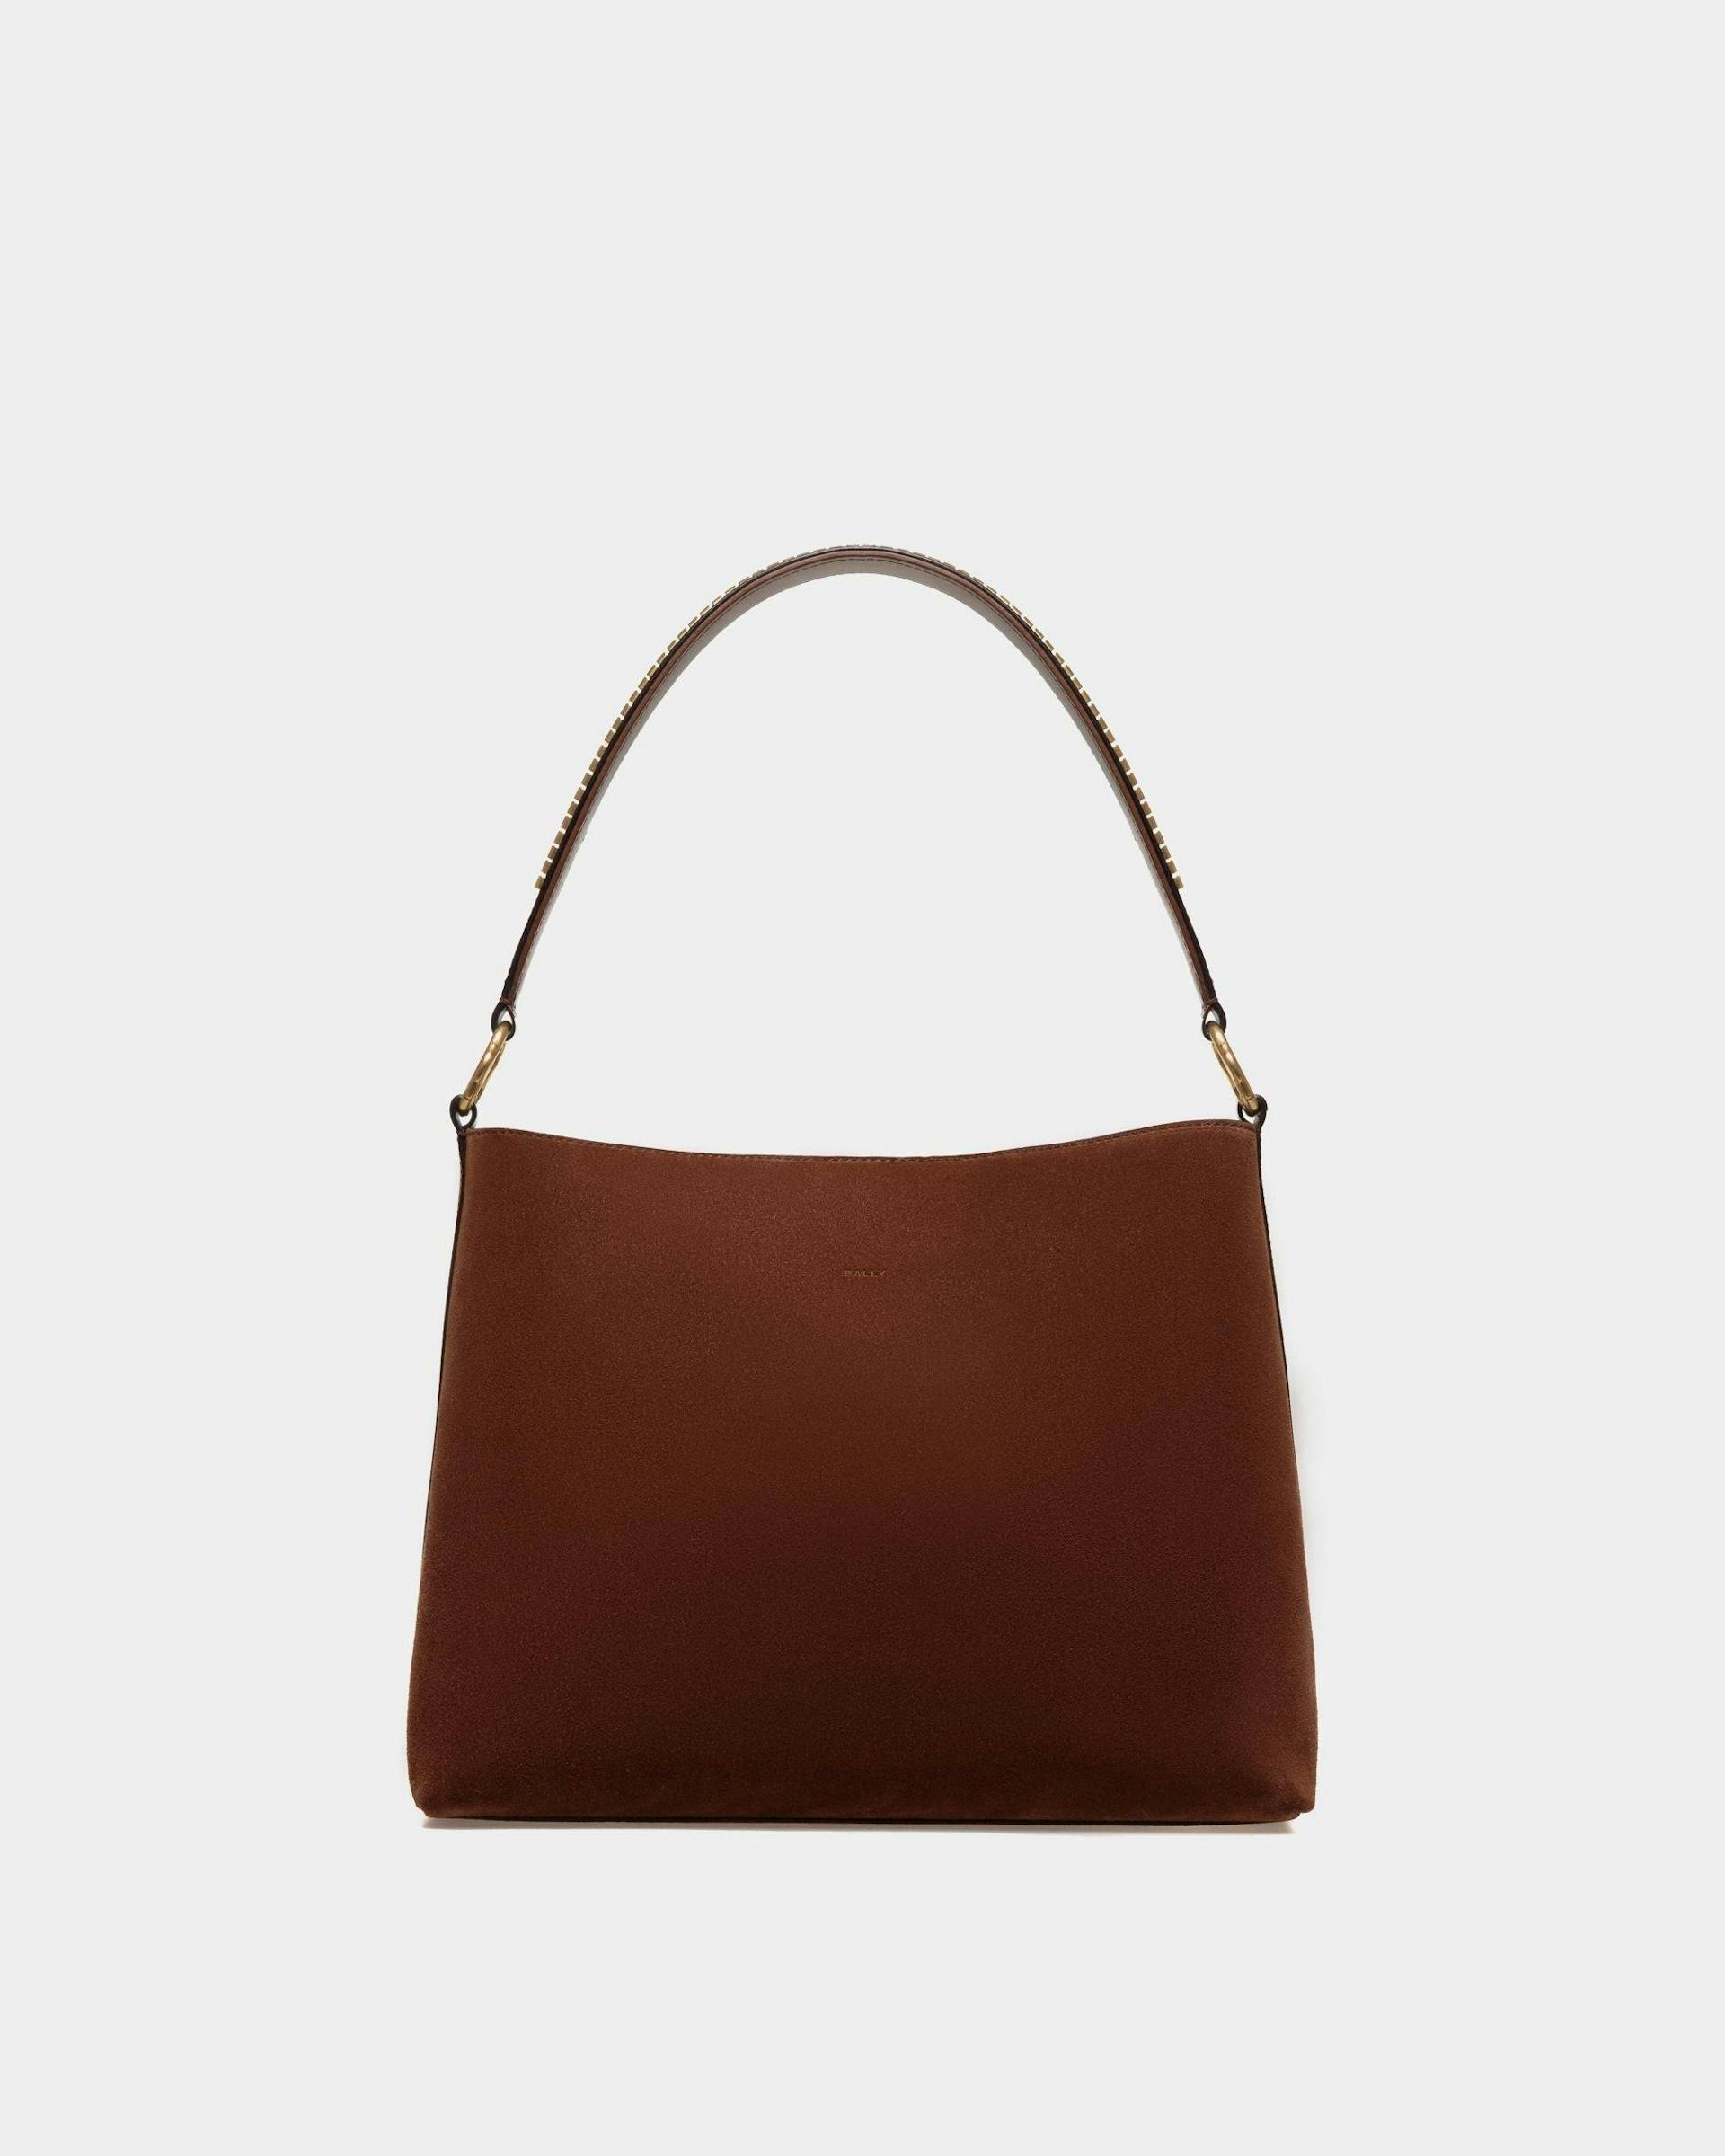 Women's Arkle Hobo Bag in Suede | Bally | Still Life Front